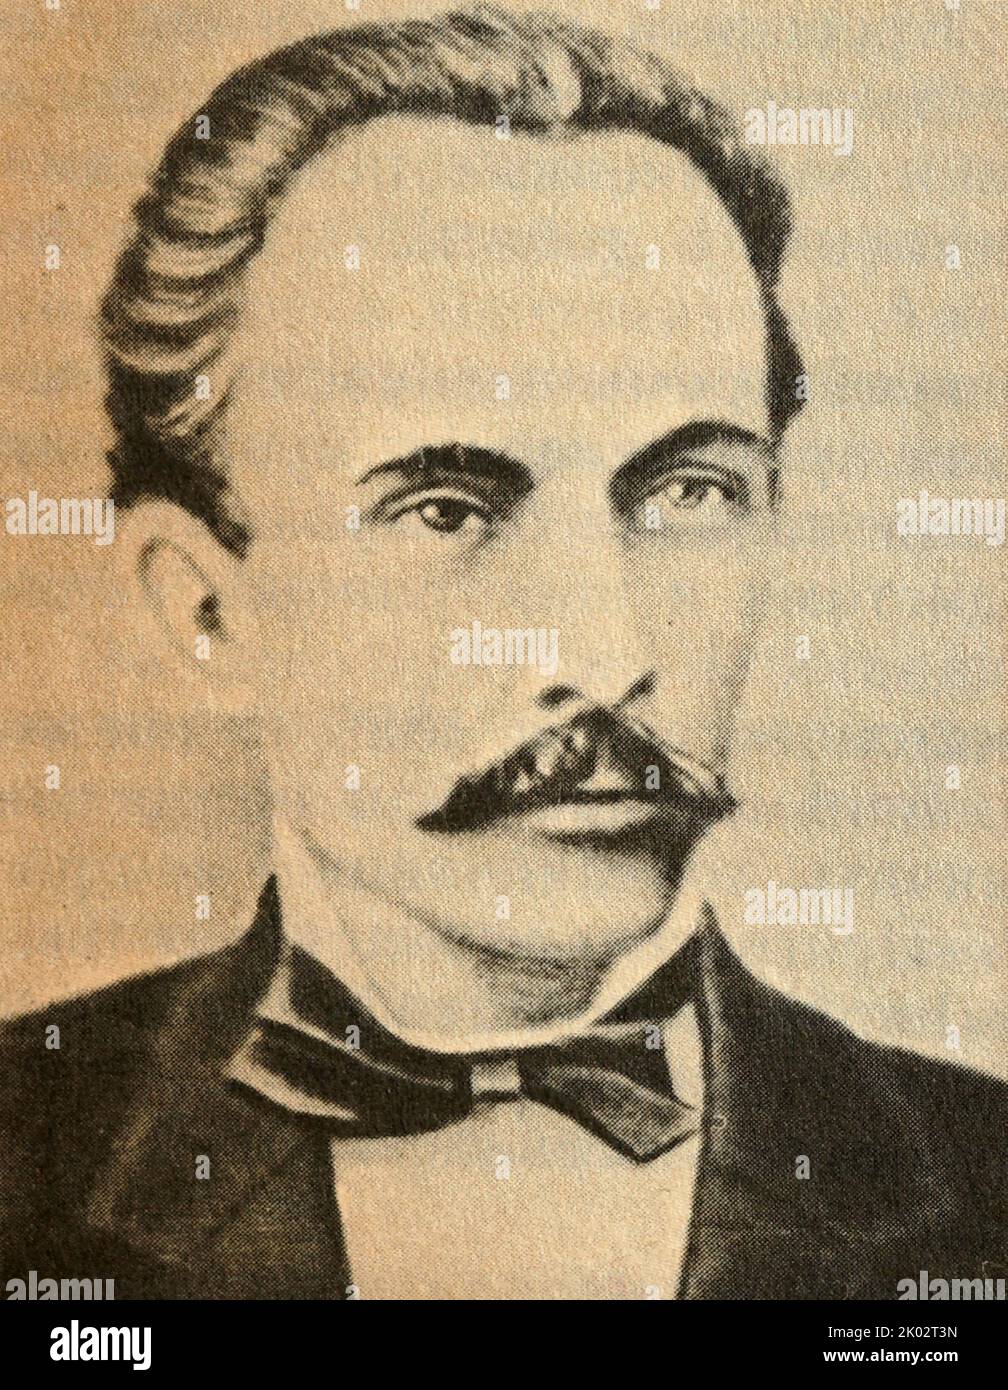 Dimitar Blagoev (1856-1924). Organizer of one of the first social democratic groups in Russia. Leader of the Bulgarian Revolutionary Social Democracy and, later, the Bulgarian Communist Party. Stock Photo